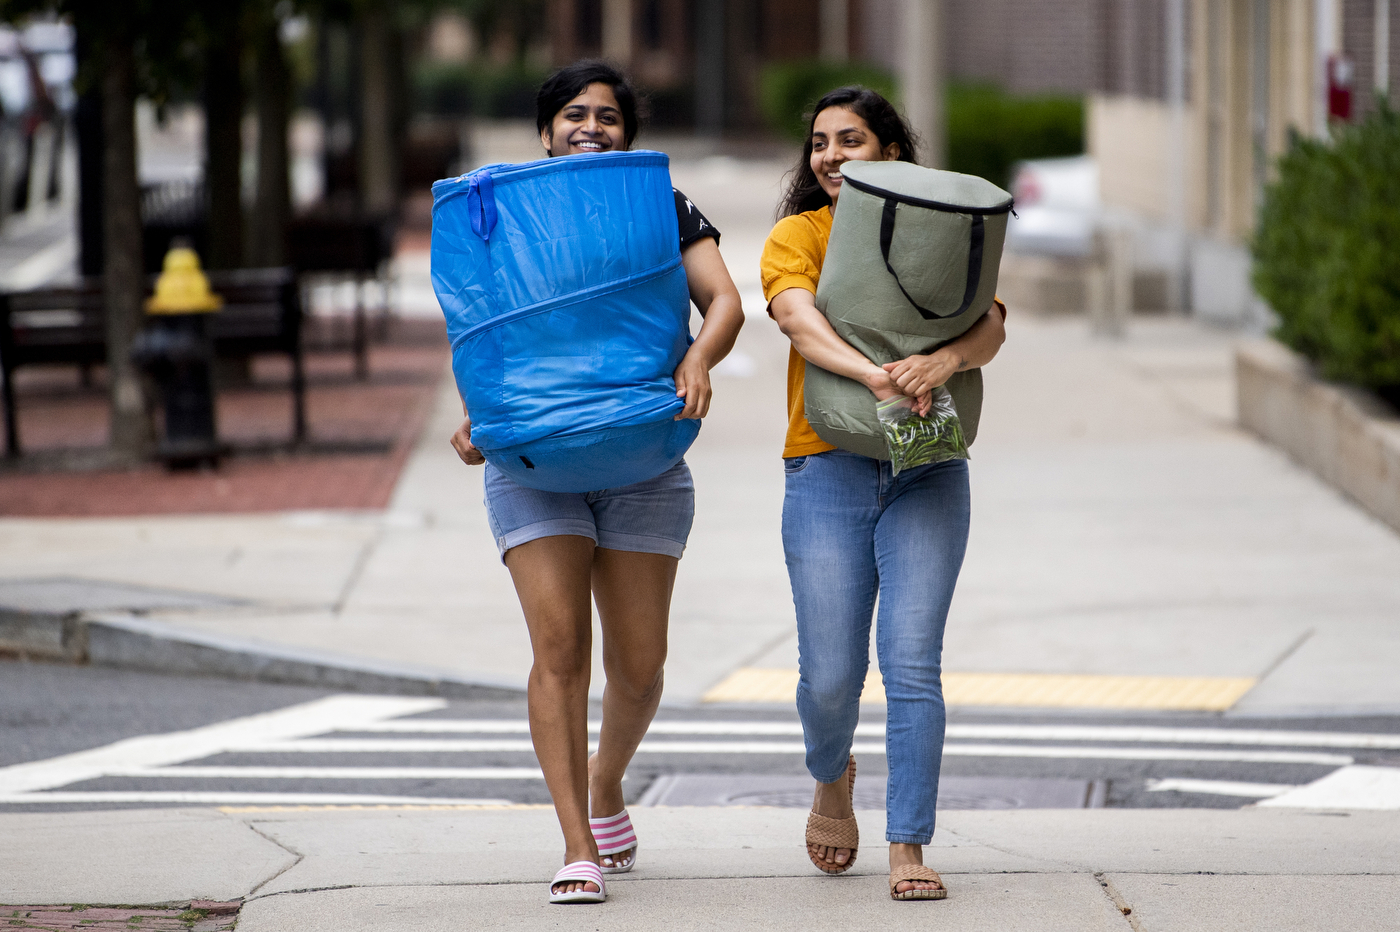 Two students have smiles on their faces as they carry clothing hampers down the sidewalk